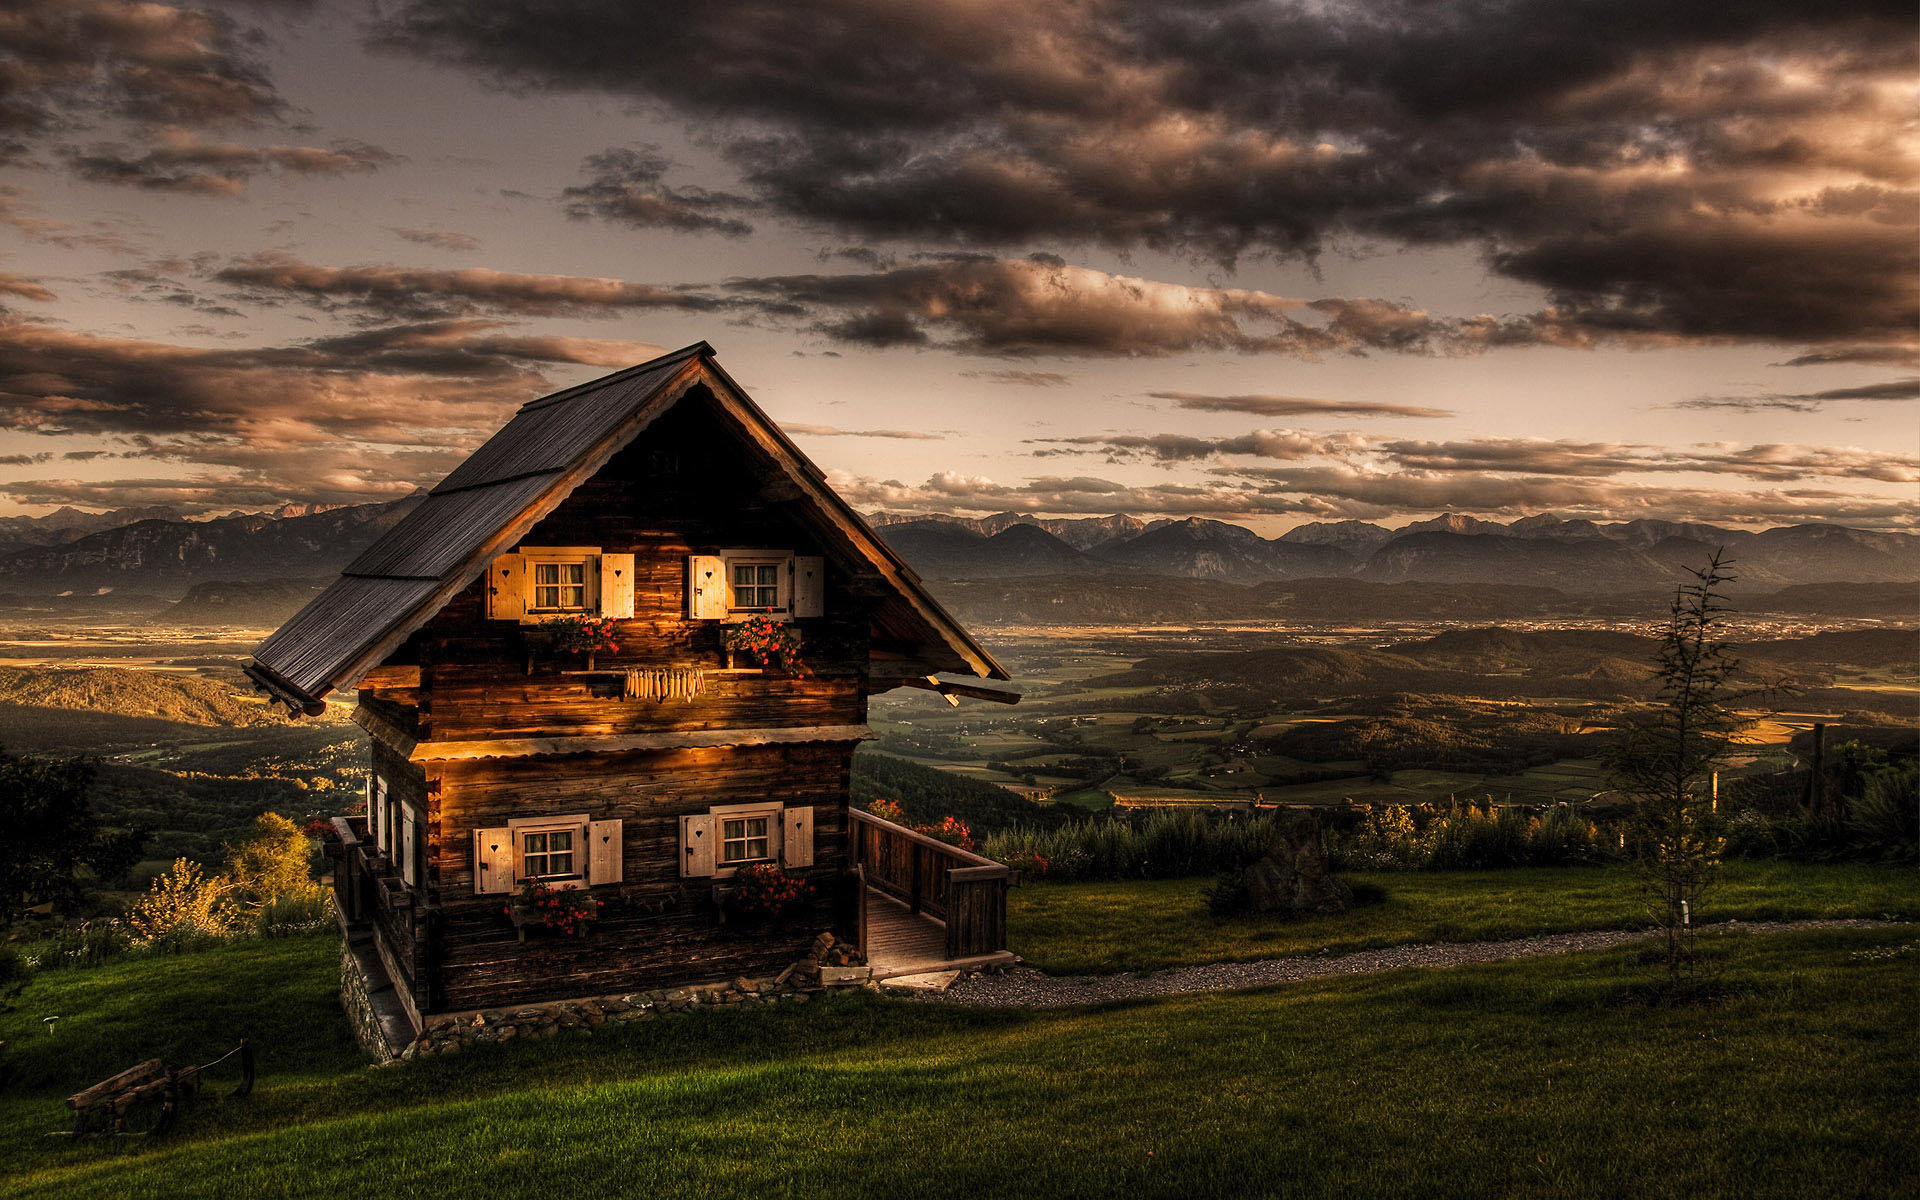 hdr, grass, sunset, hill, house, man made, building, cabin, landscape, mountain